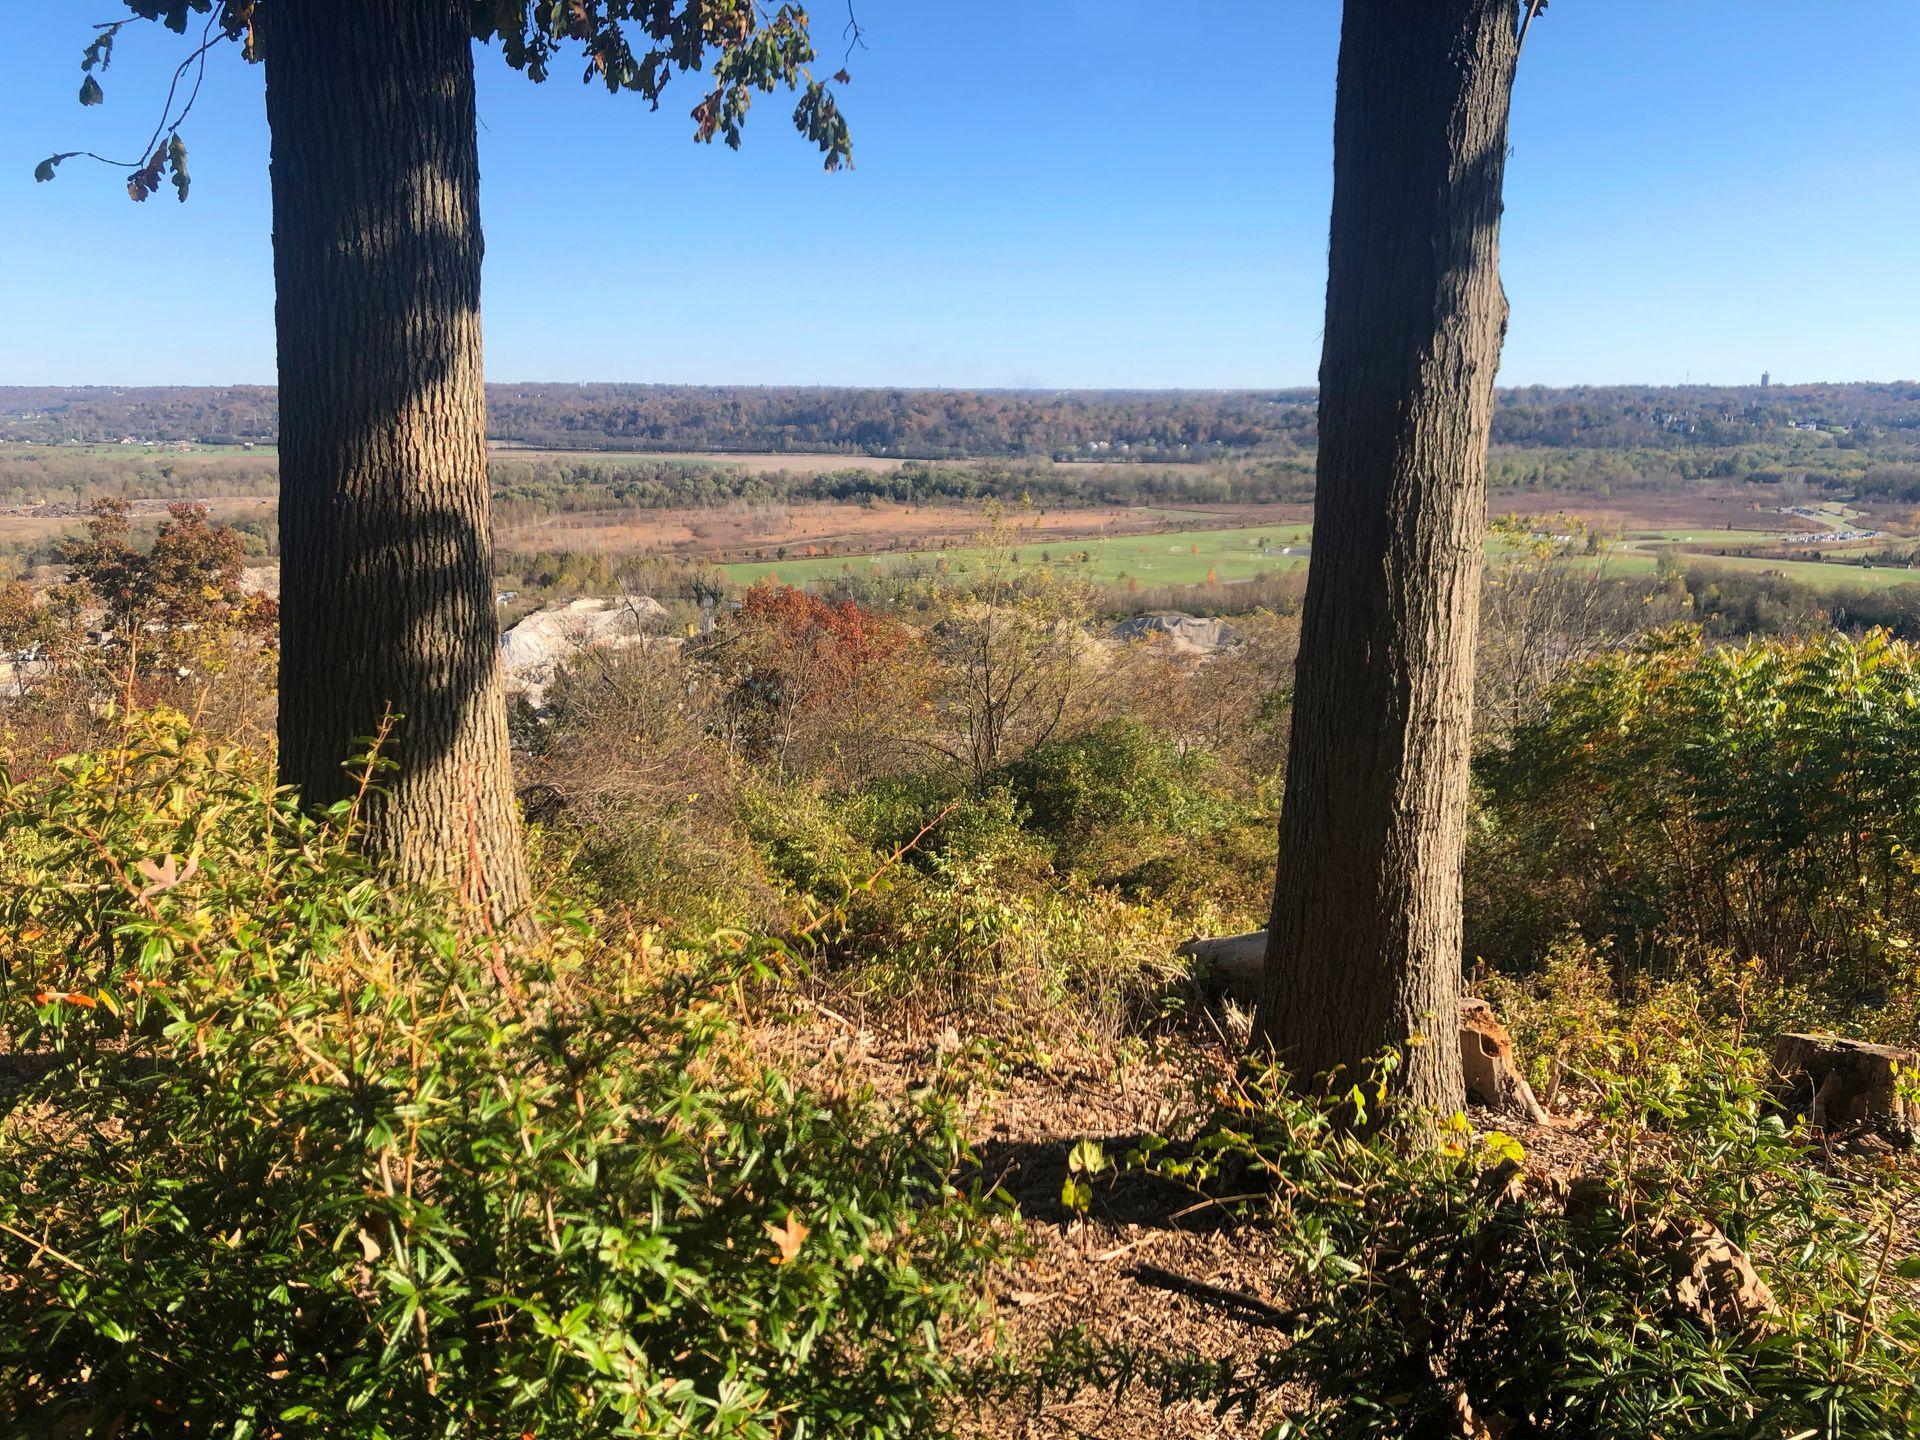 Looking down at the Otto Armleder Park from the Heekin Overlook in Ault Park